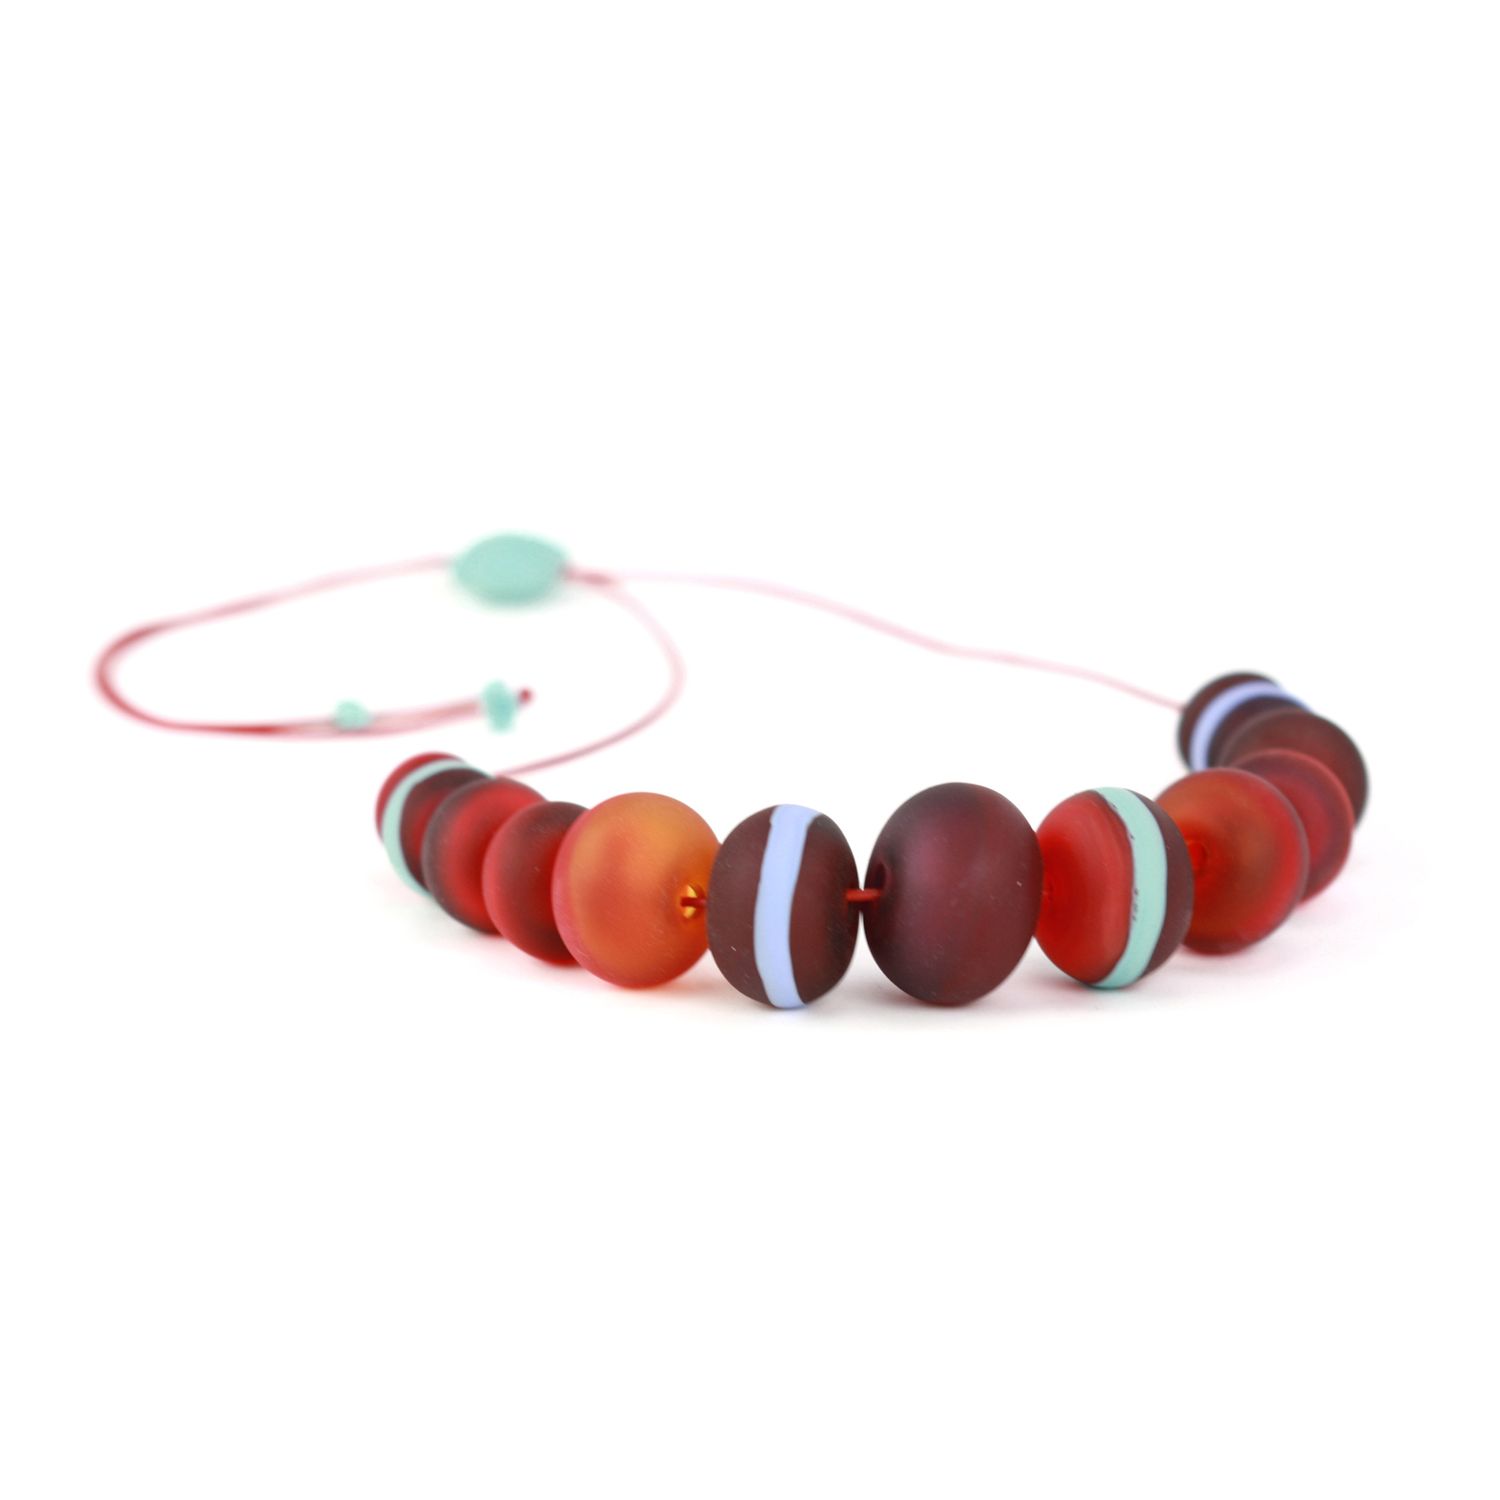 Alicia Niles: Soft Stripe Necklace – Red, Orange & Blue Product Image 4 of 4